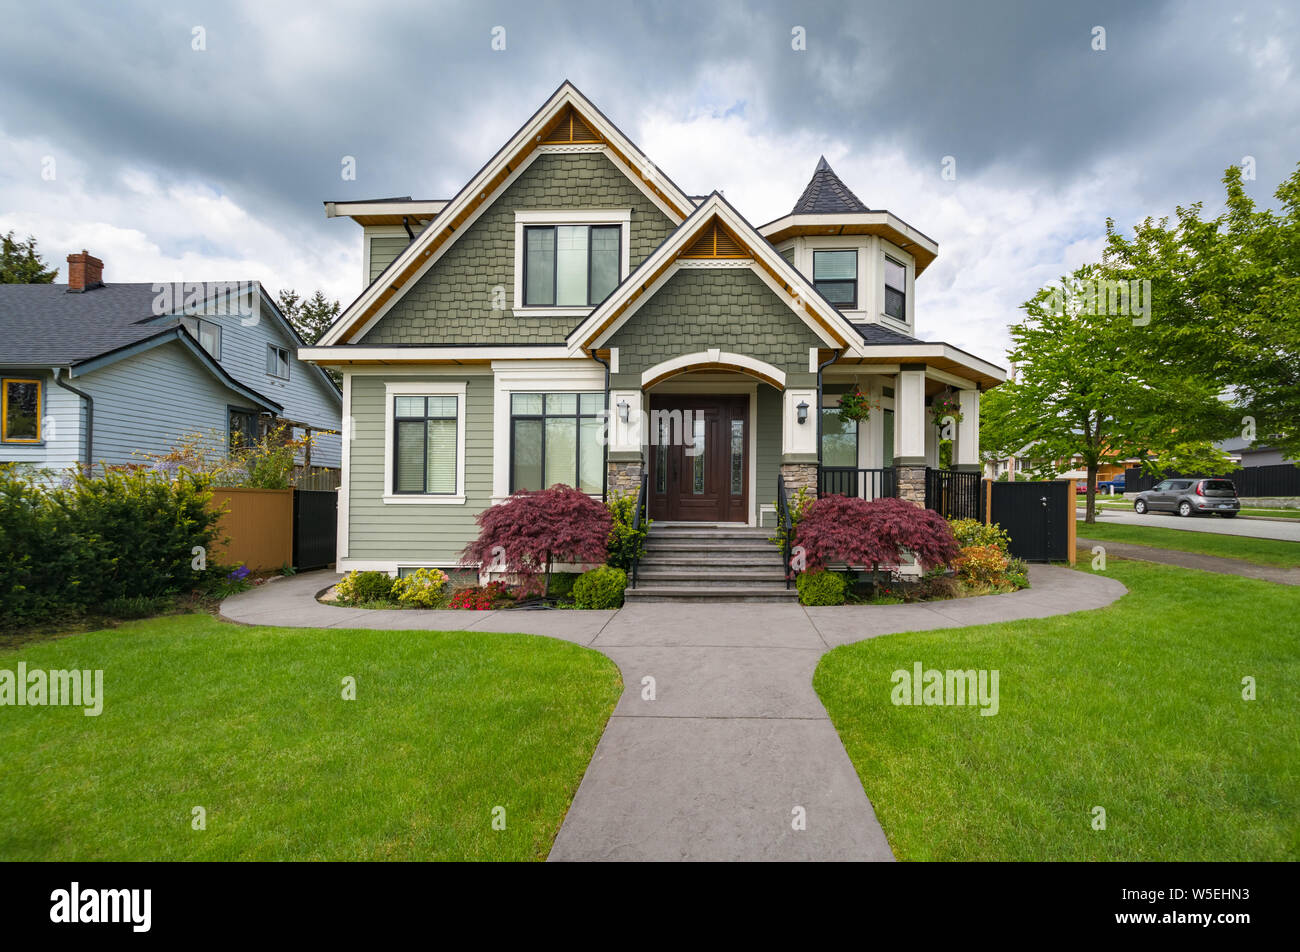 Residential family house with concrete pathway over front yard Stock Photo